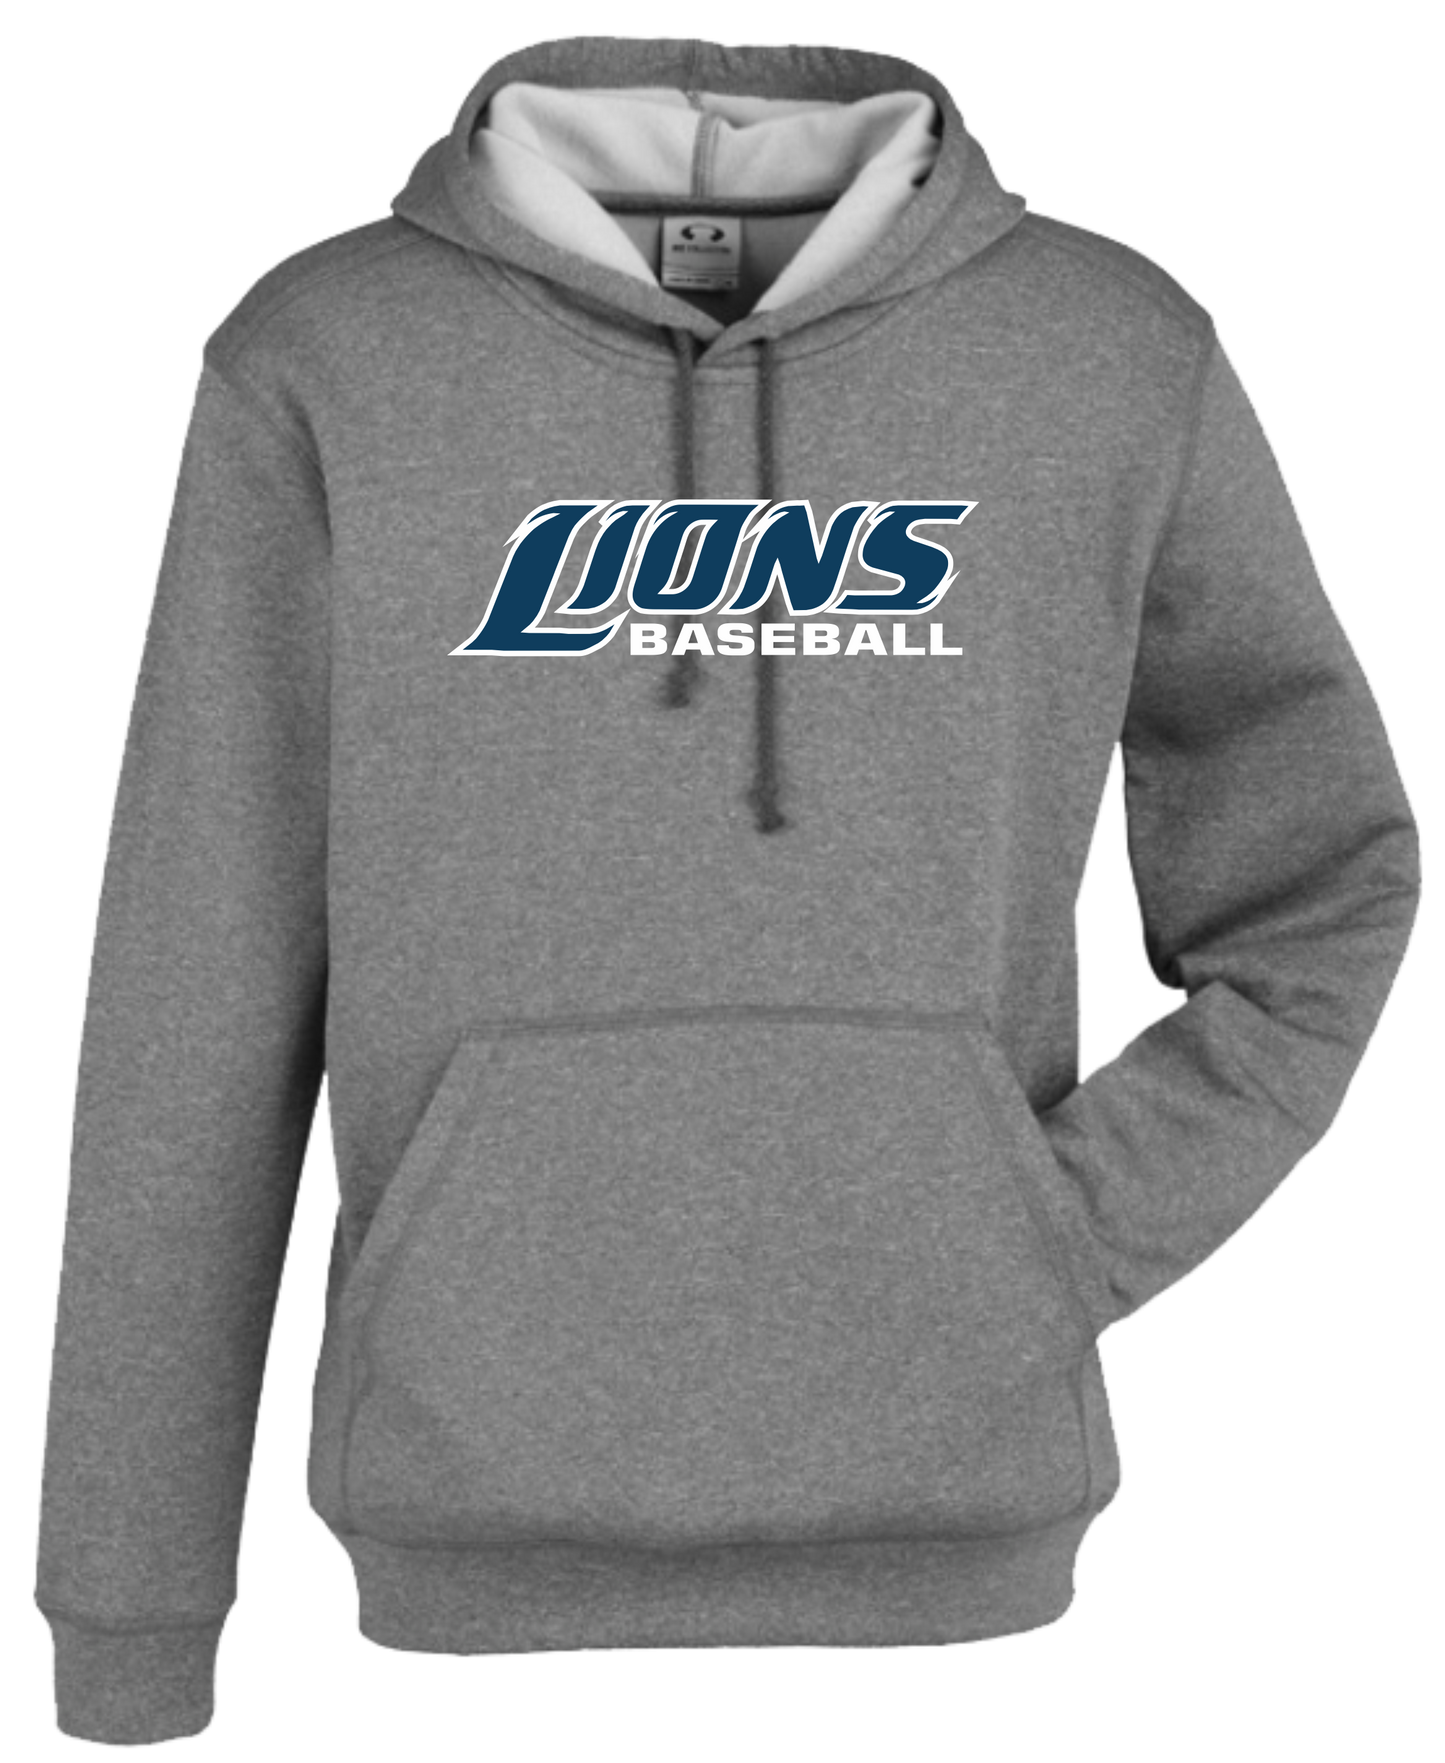 Lions Baseball Unisex and Youth Pullover Grey Marle DriFit Hoodie